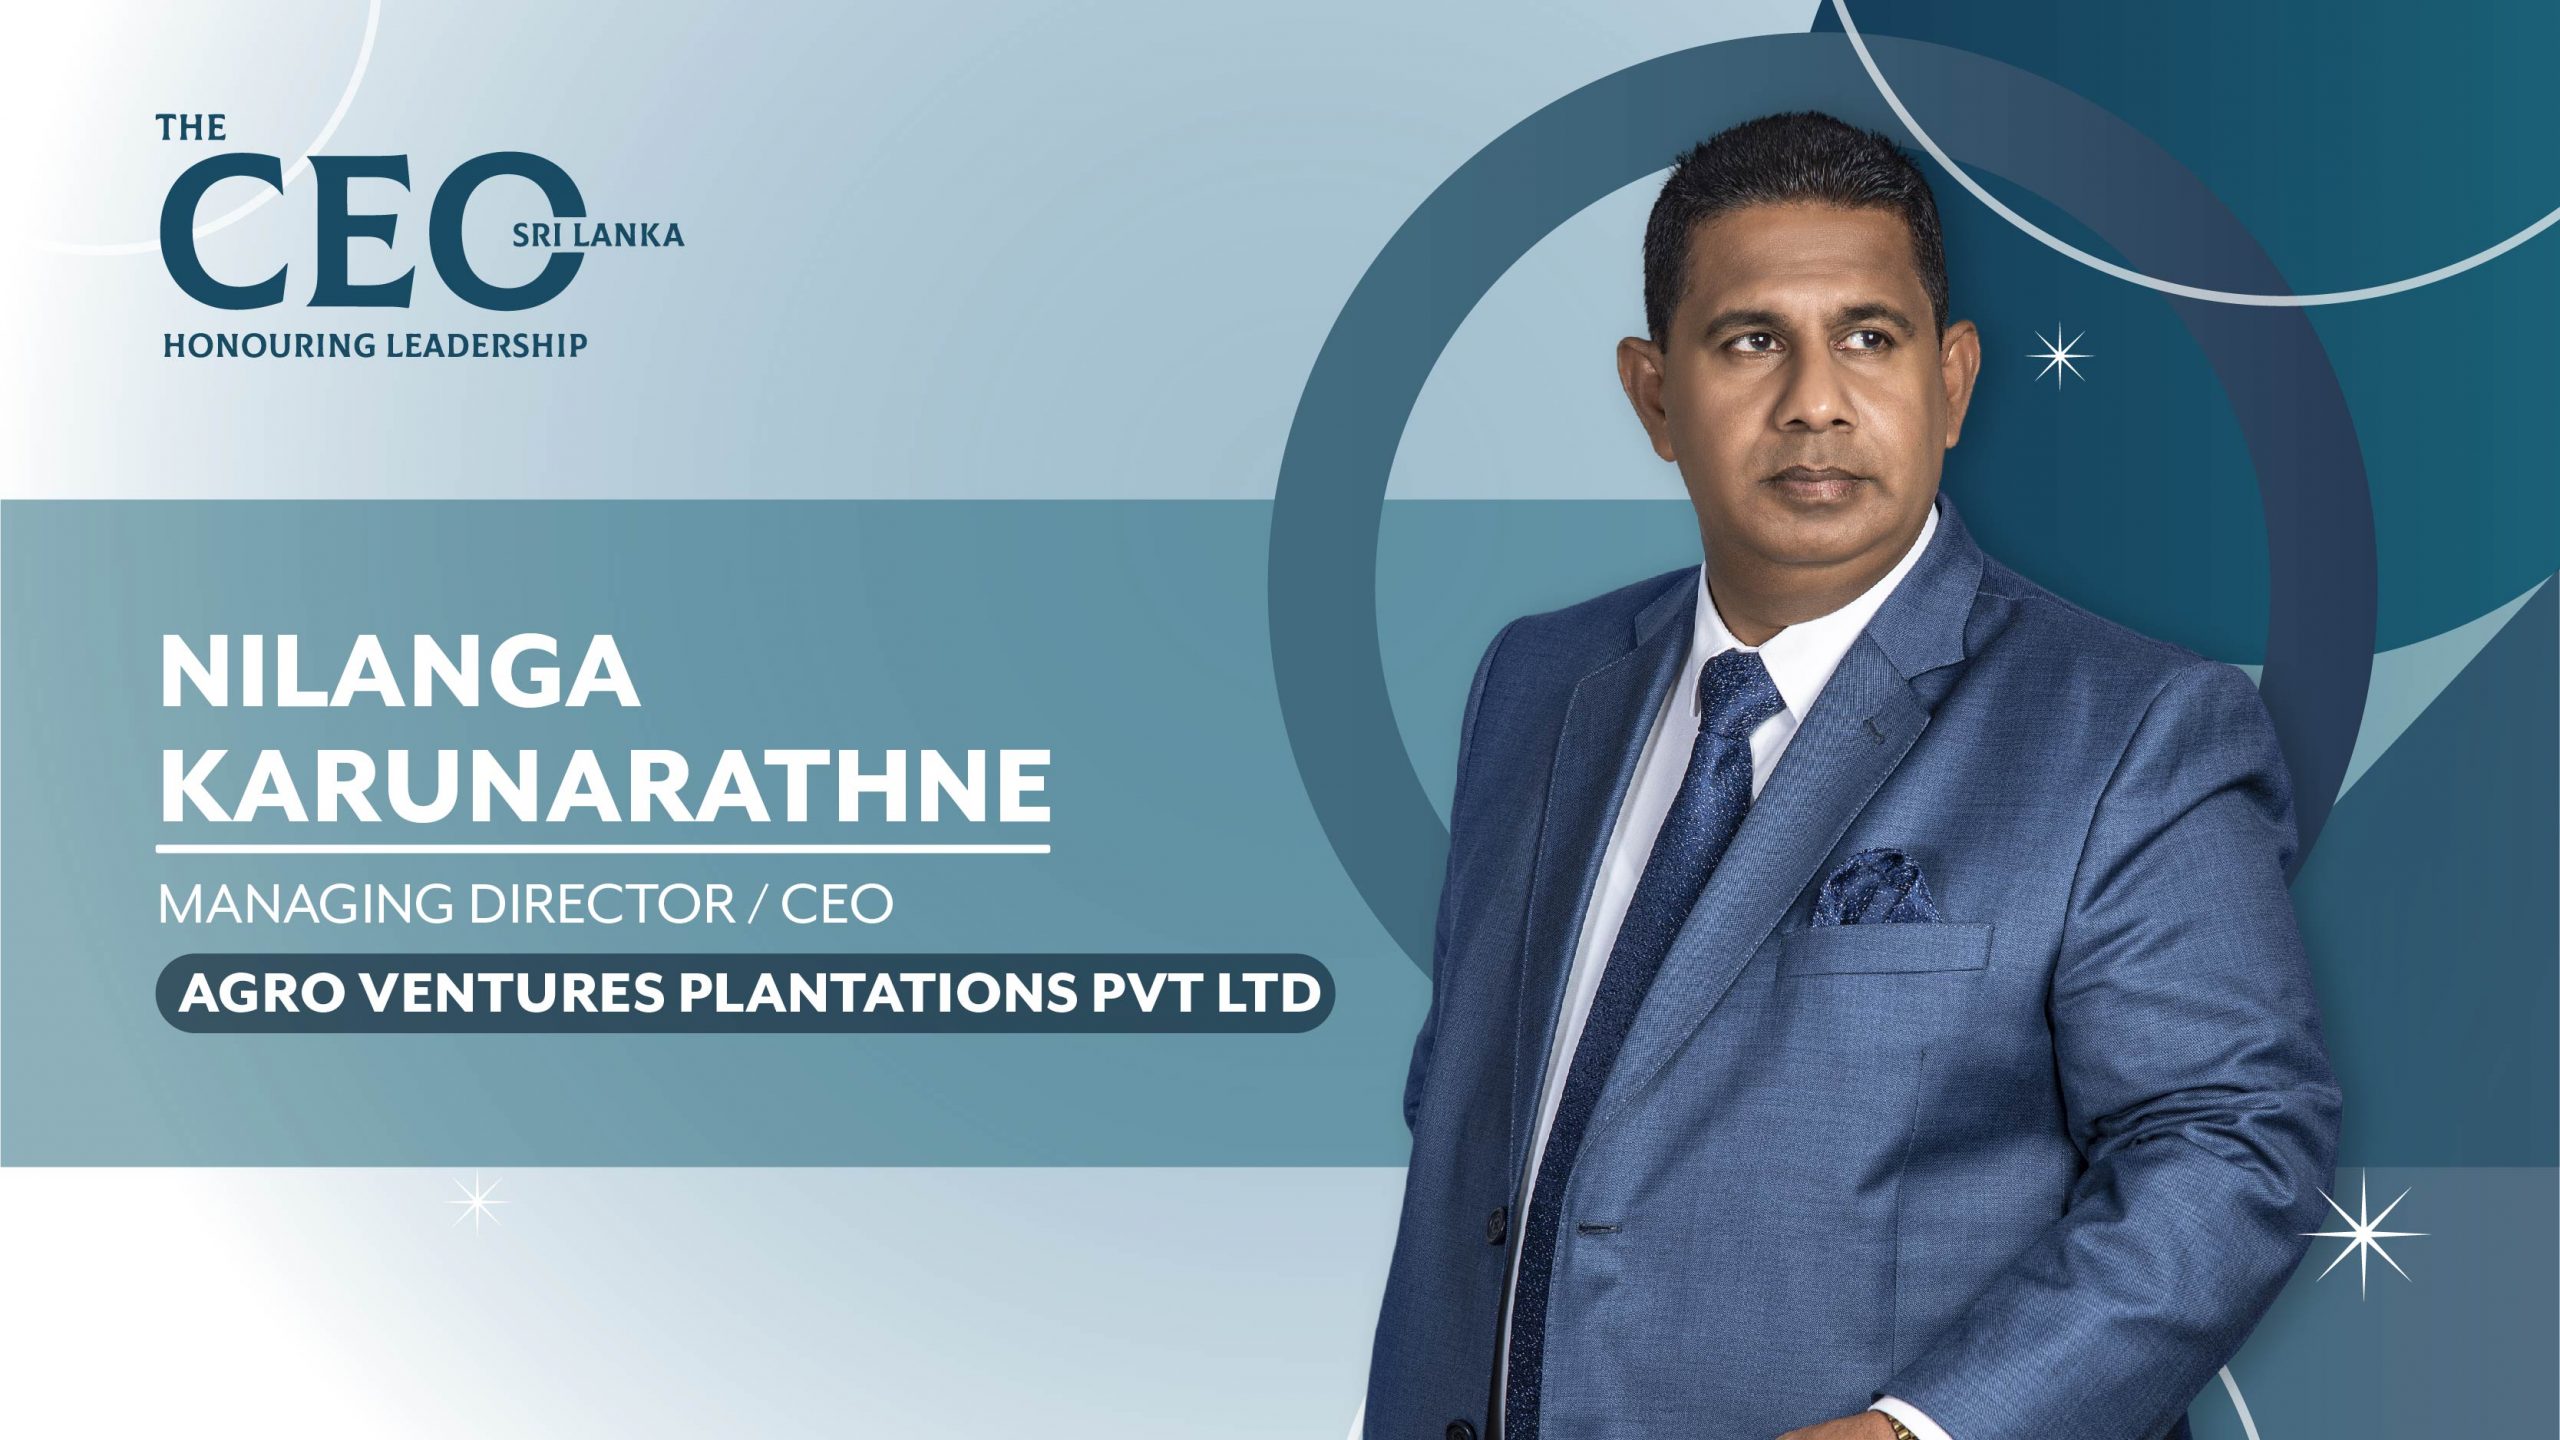 REBRANDING SRI LANKA’S FLAVOUR AS A VANILLA EXPORTER – MANAGING DIRECTOR/CHIEF EXECUTIVE OFFICER OF AGRO VENTURES PLANTATIONS PRIVATE LIMITED, NILANGA KARUNARATHNE